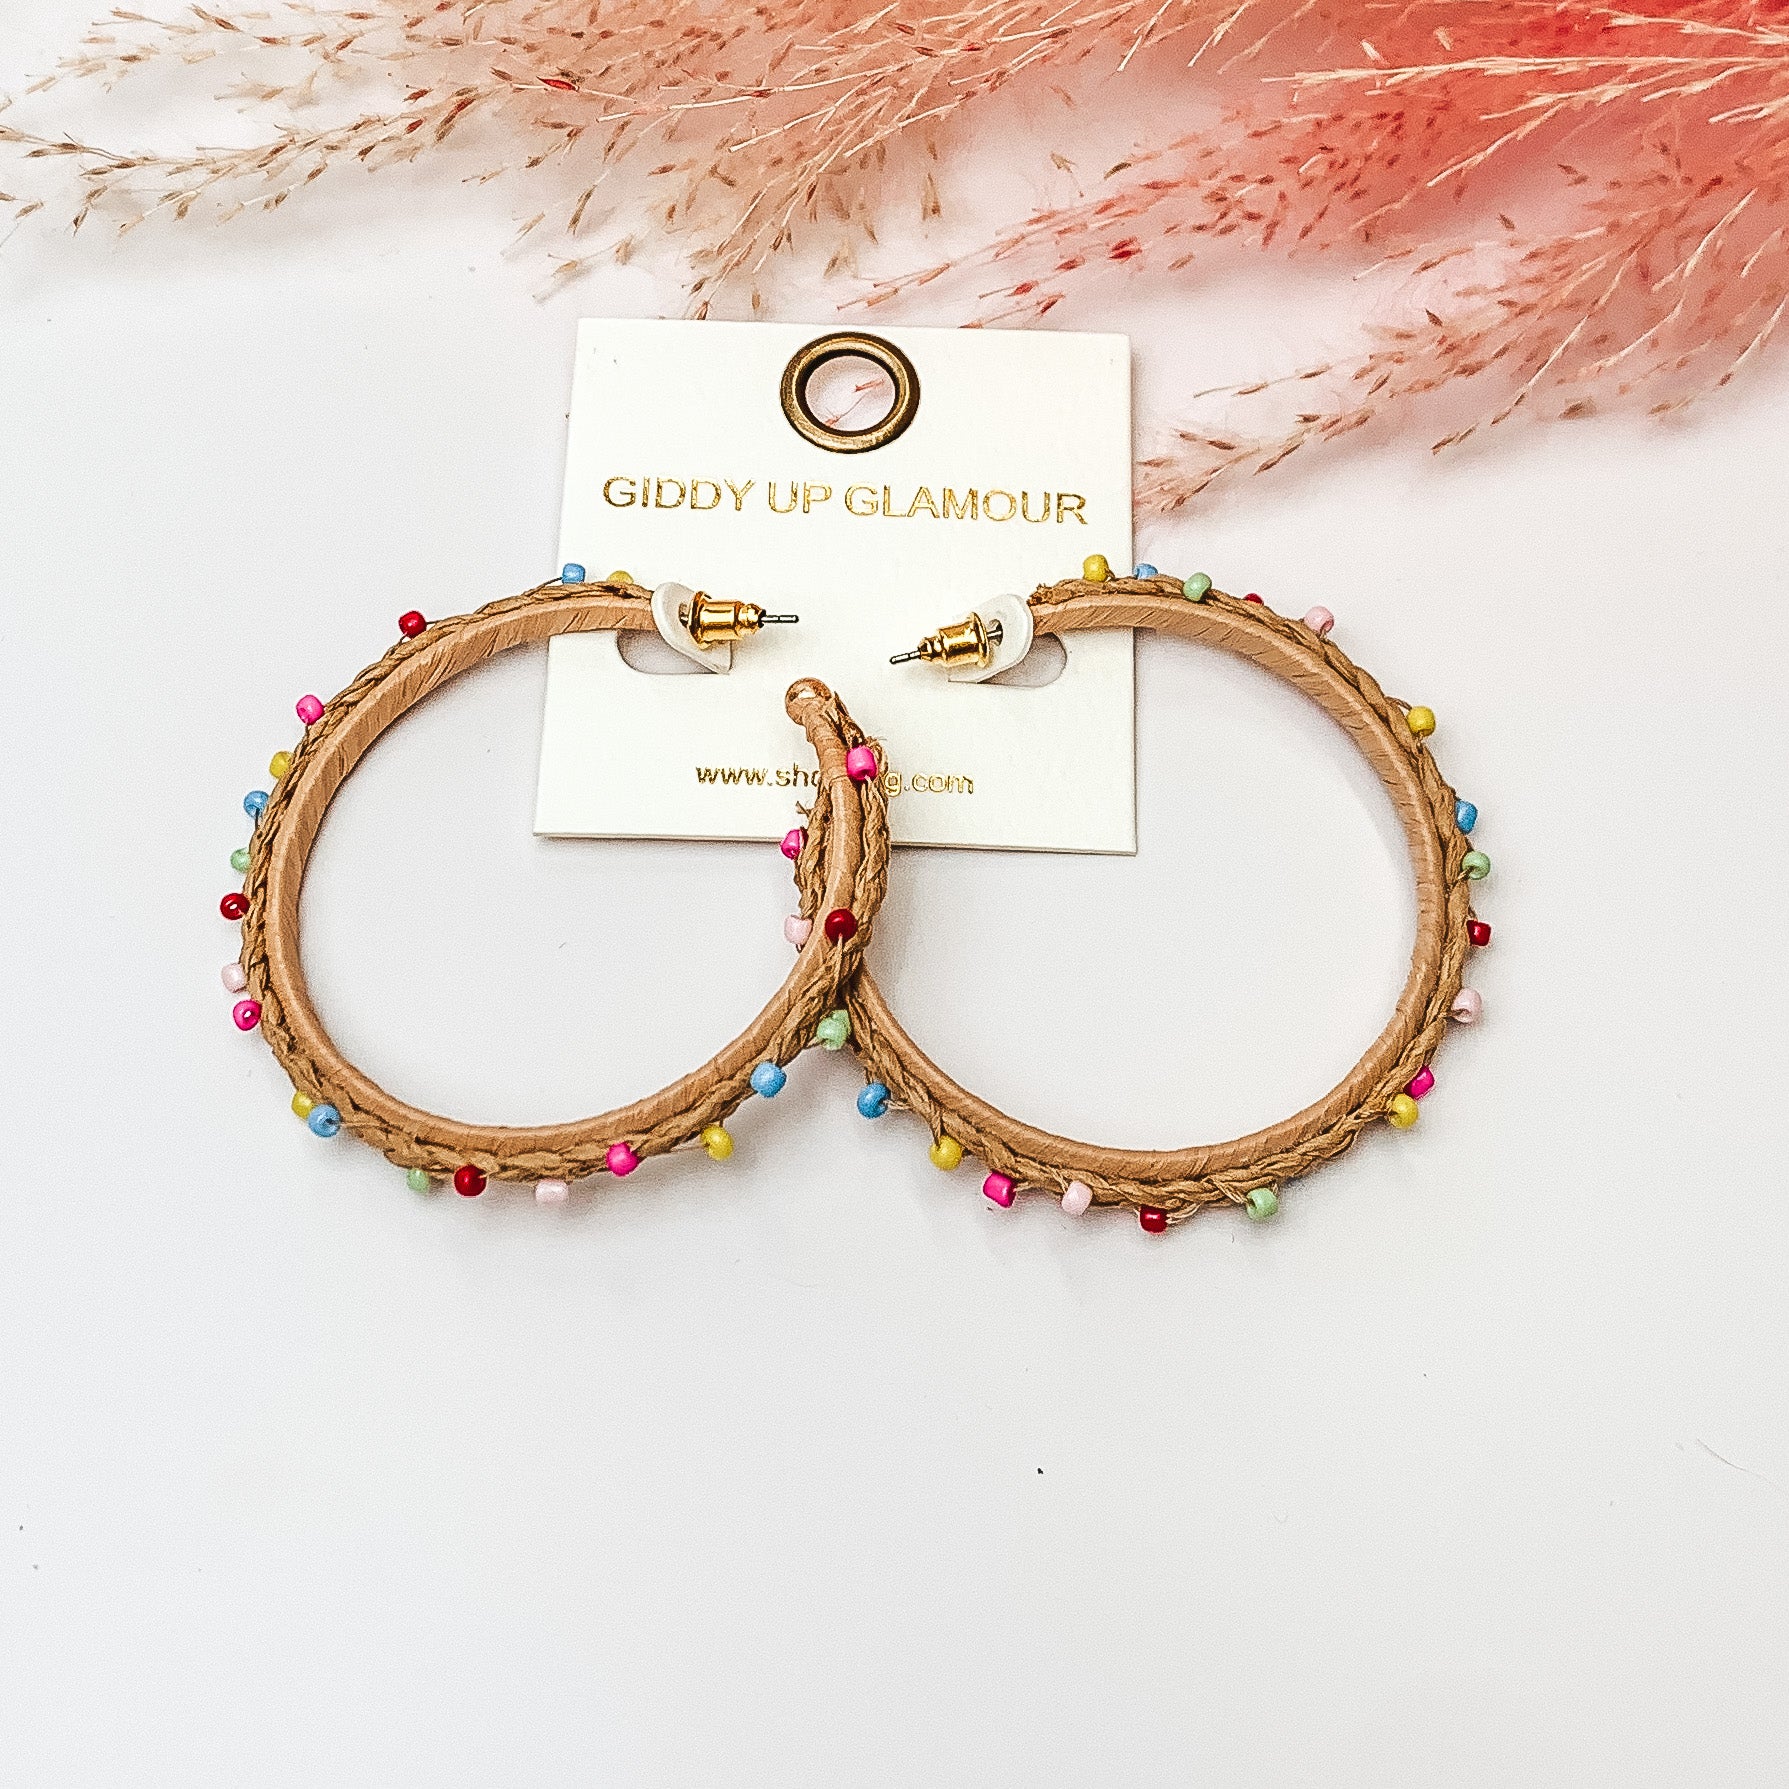 Pictured are raffia braided hoop earrings in tan with colorful beads. They are pictured with a pink feather on a white background.